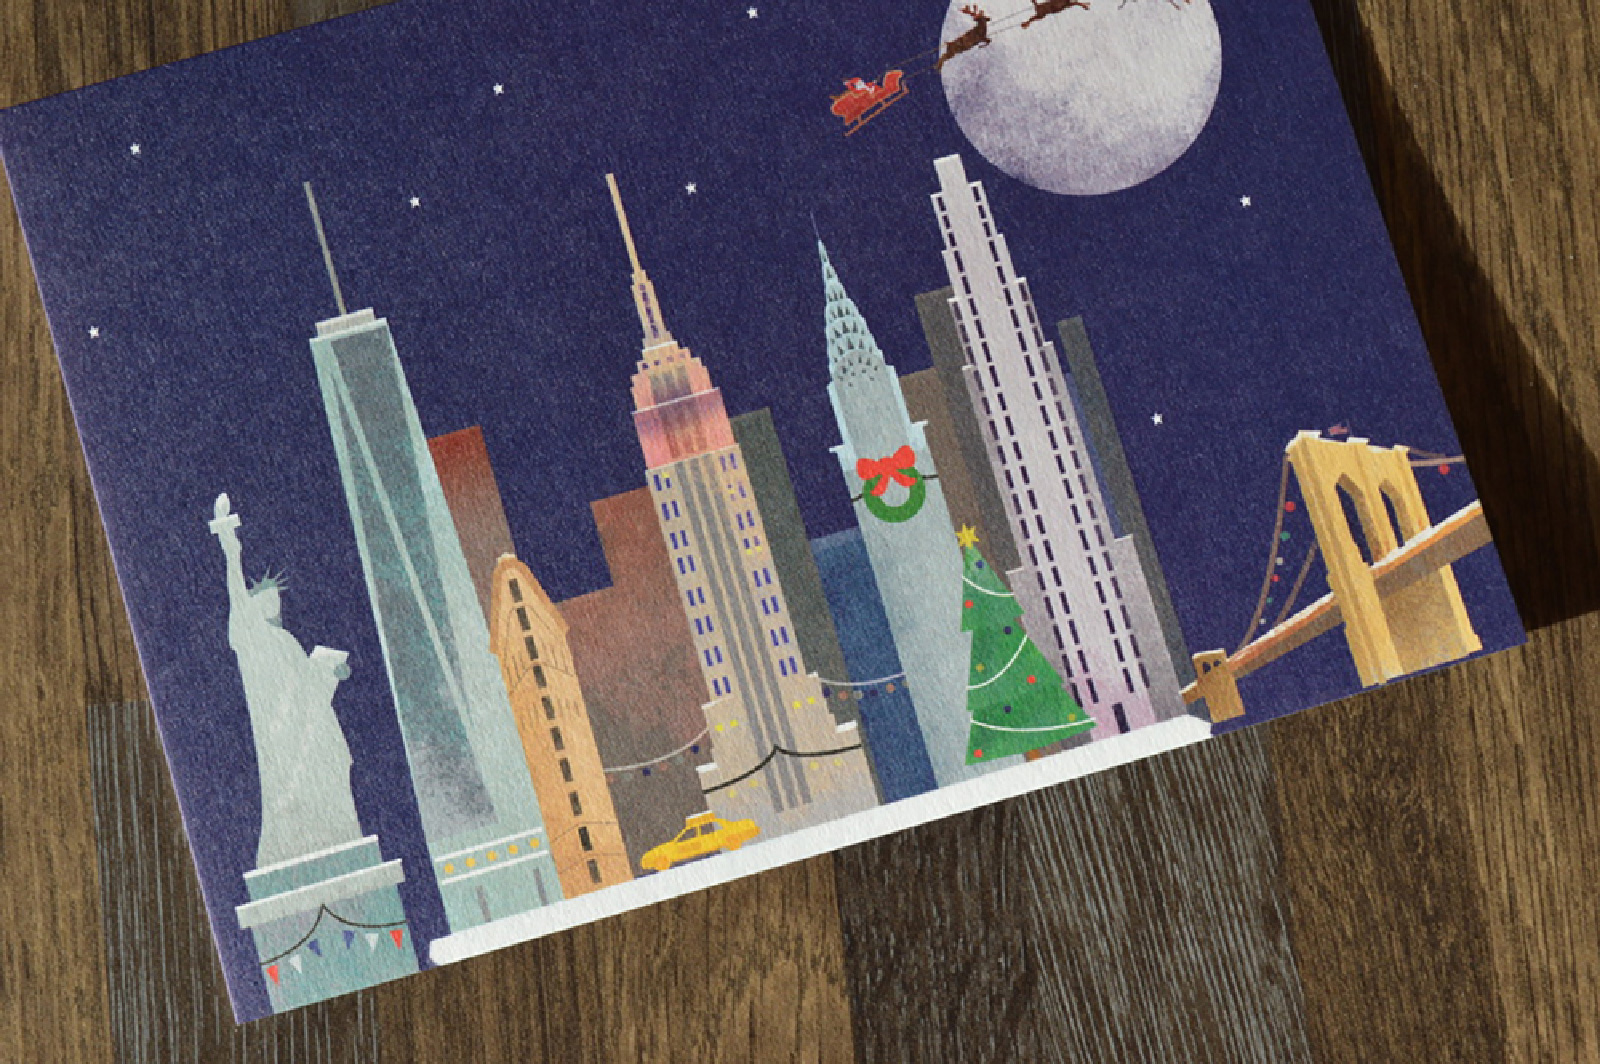 New York cropped card design by Helen Nowell